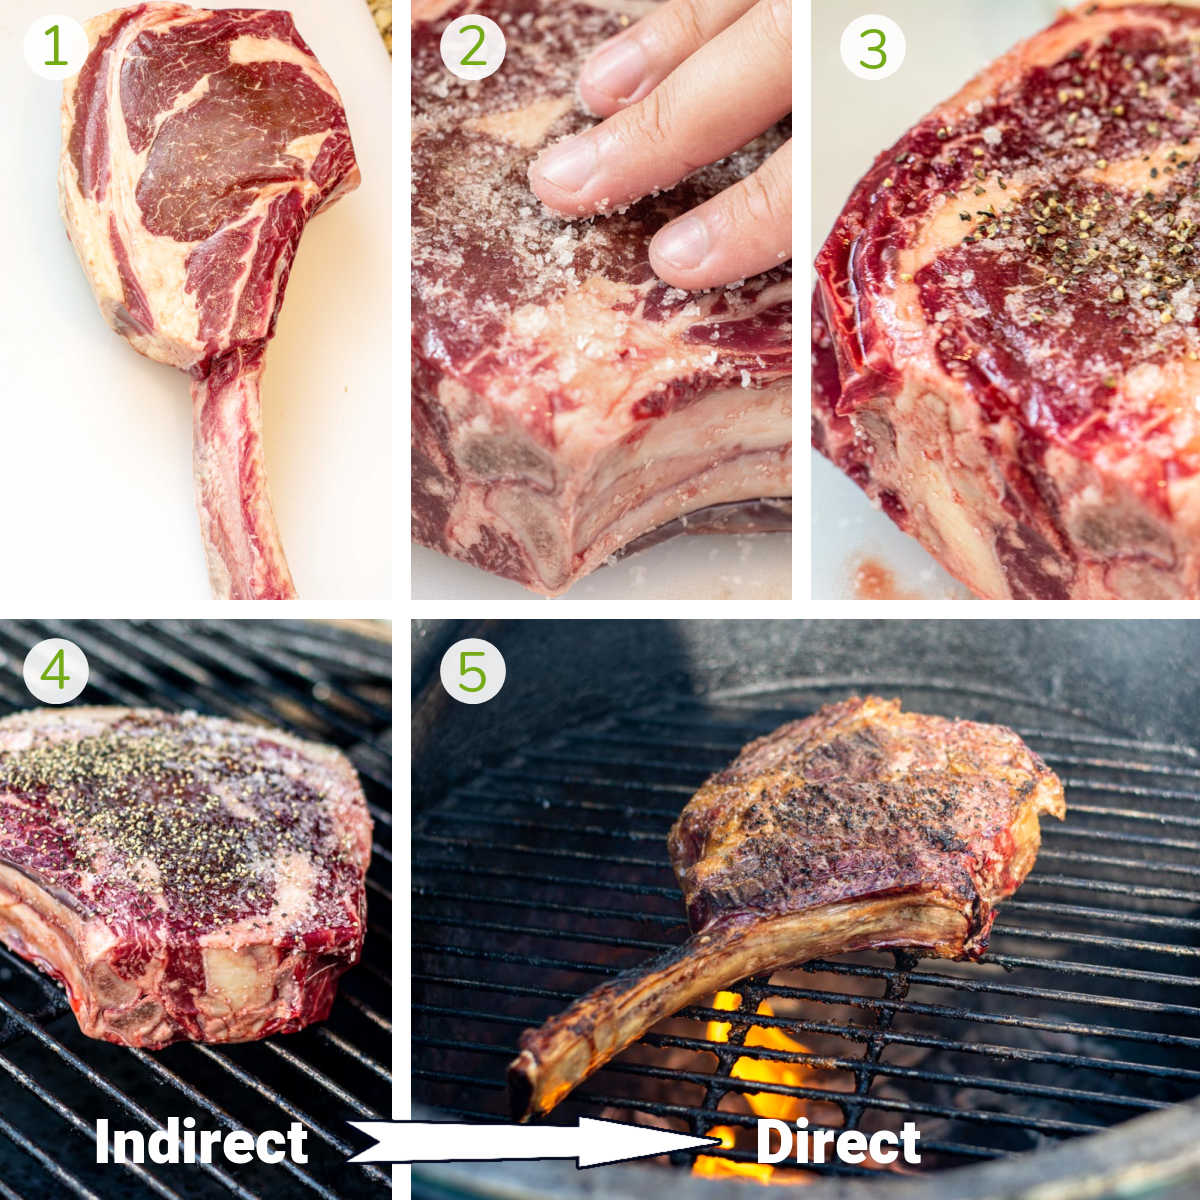 process photos showing the trimmed ribeye, adding salt and pepper, and then grilling from indirect to direct heat.